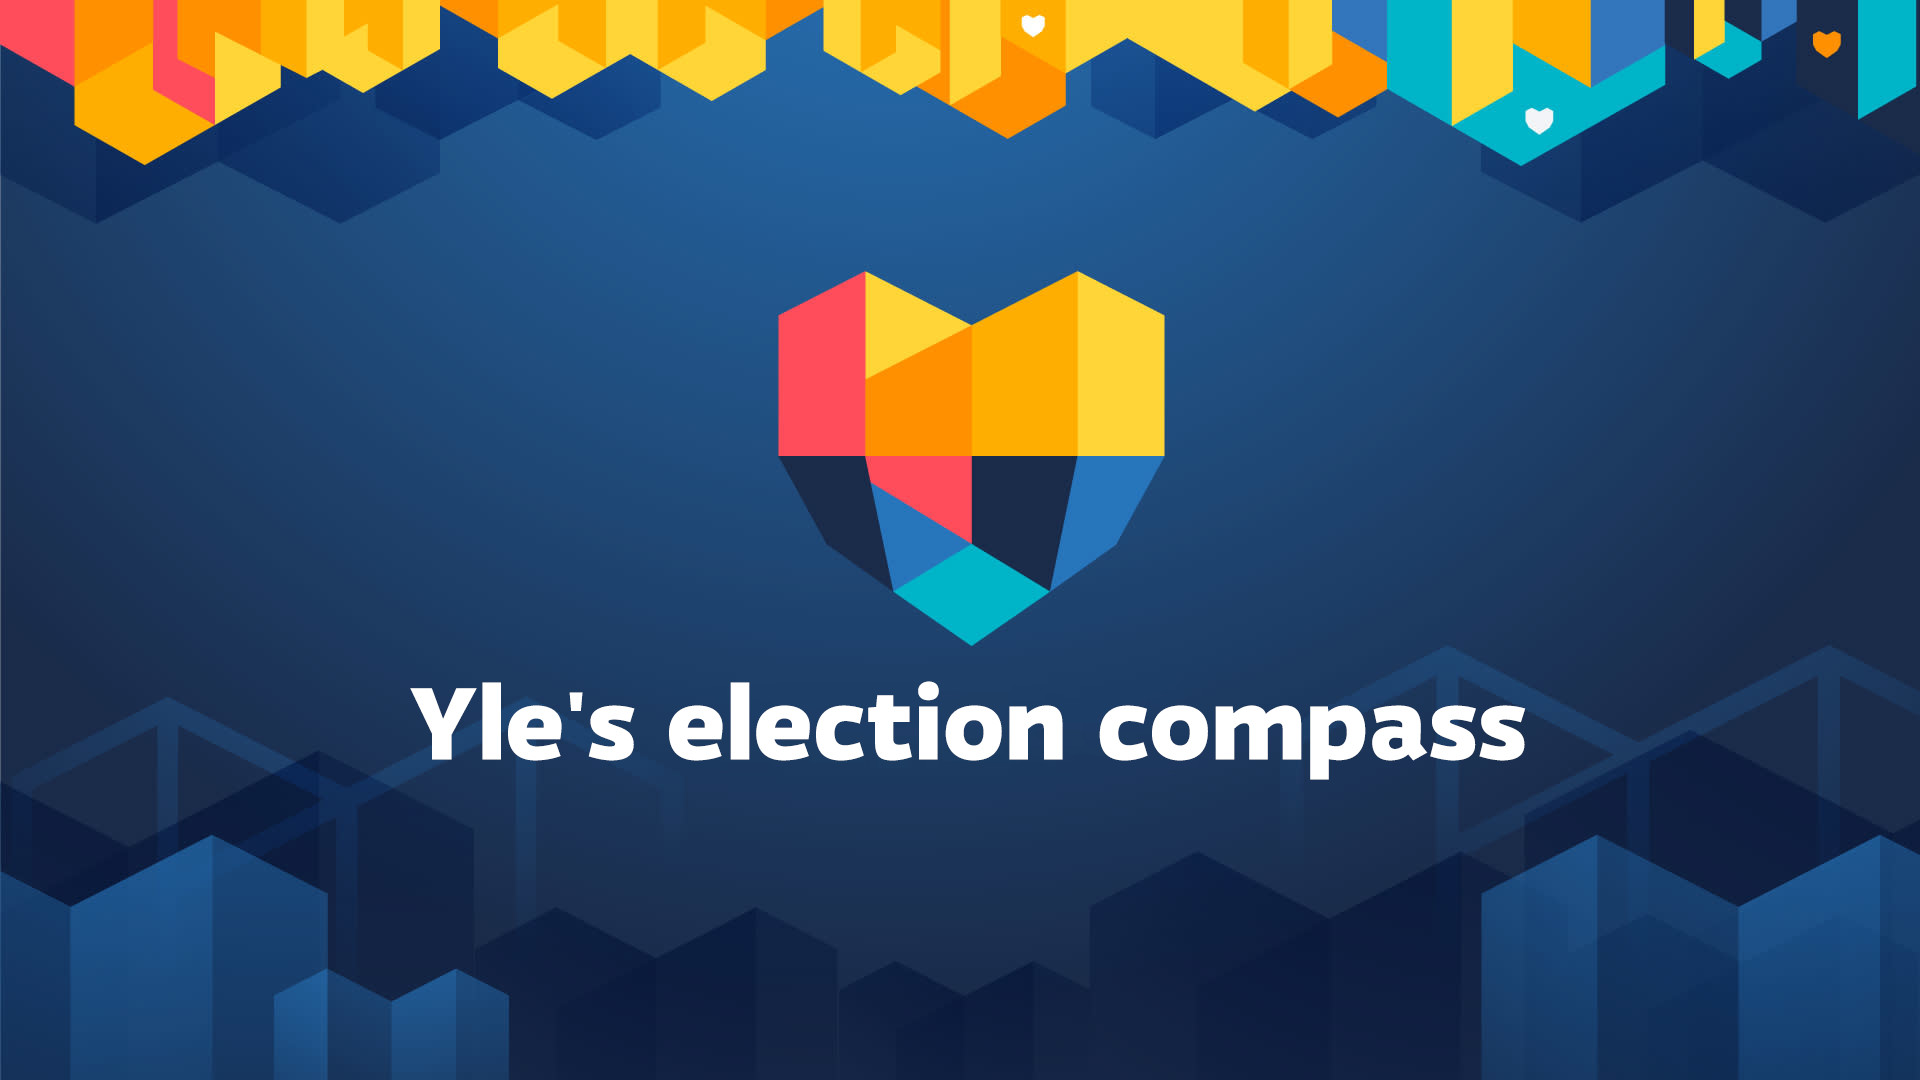 Yle’s election compass finds parties and candidates who share your views